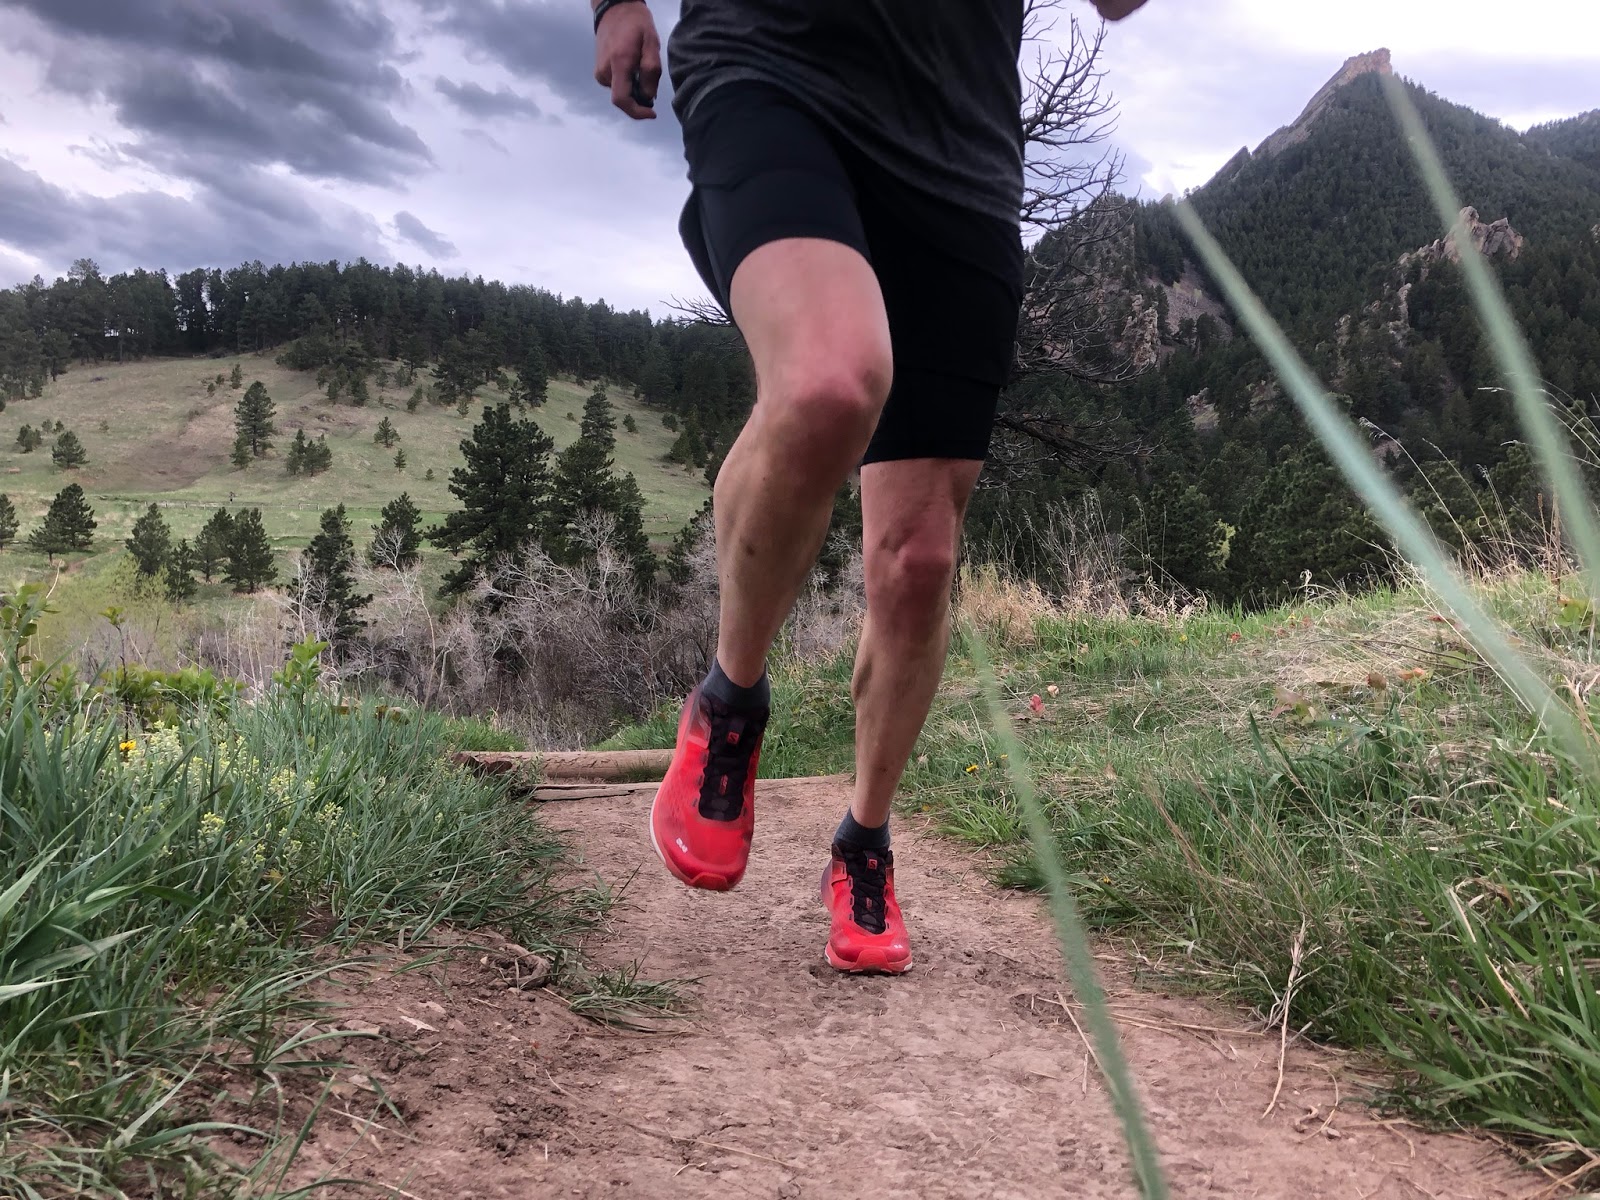 Road Trail Run: S/Lab Ultra 2 Full Review - Significant Upper & Footshape Updates are a Winning Combination!